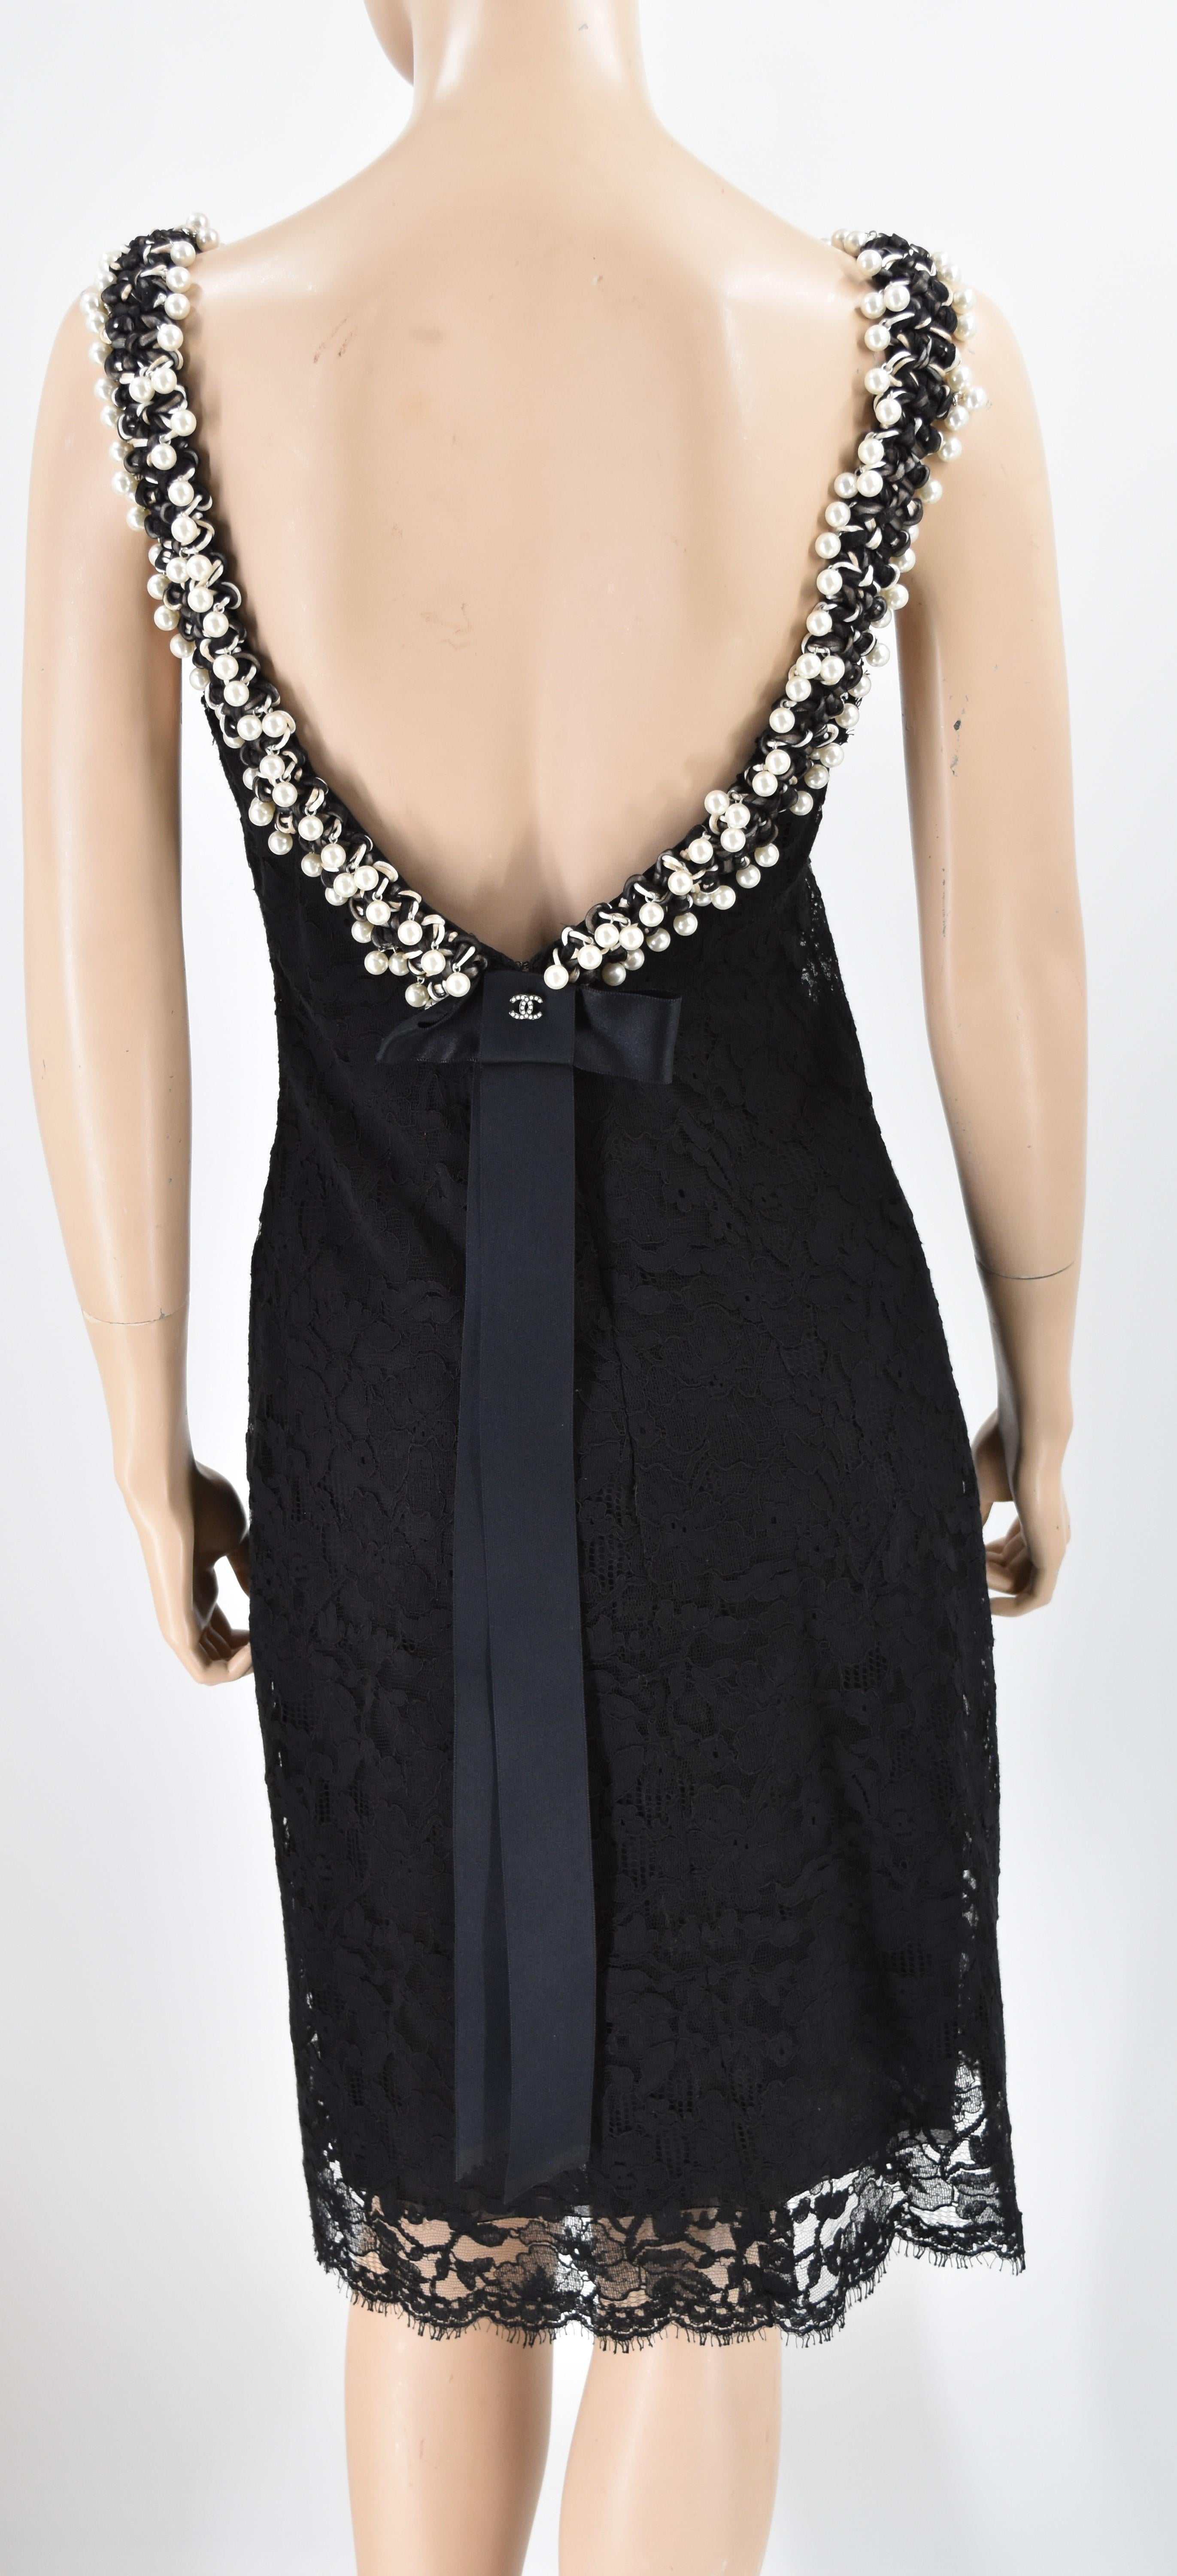 Chanel Faux Pearl Embellished Lace Dress 38 New In New Condition For Sale In Merced, CA